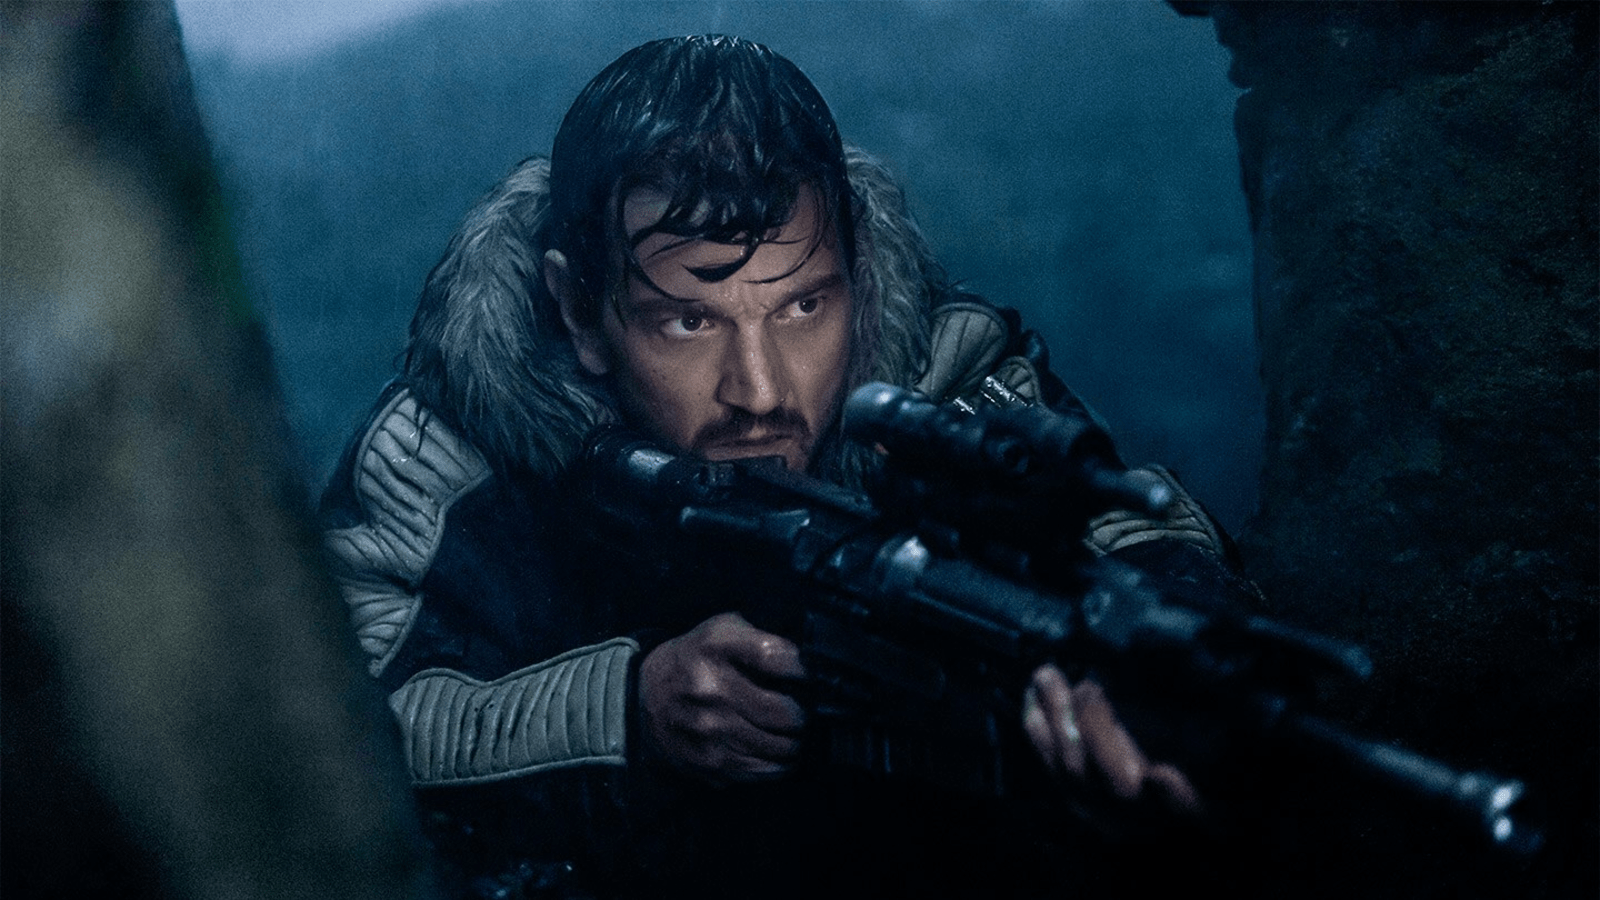 Cassian Andor (Diego Luna) takes aim in Rogue One. (Image: Lucasfilm)